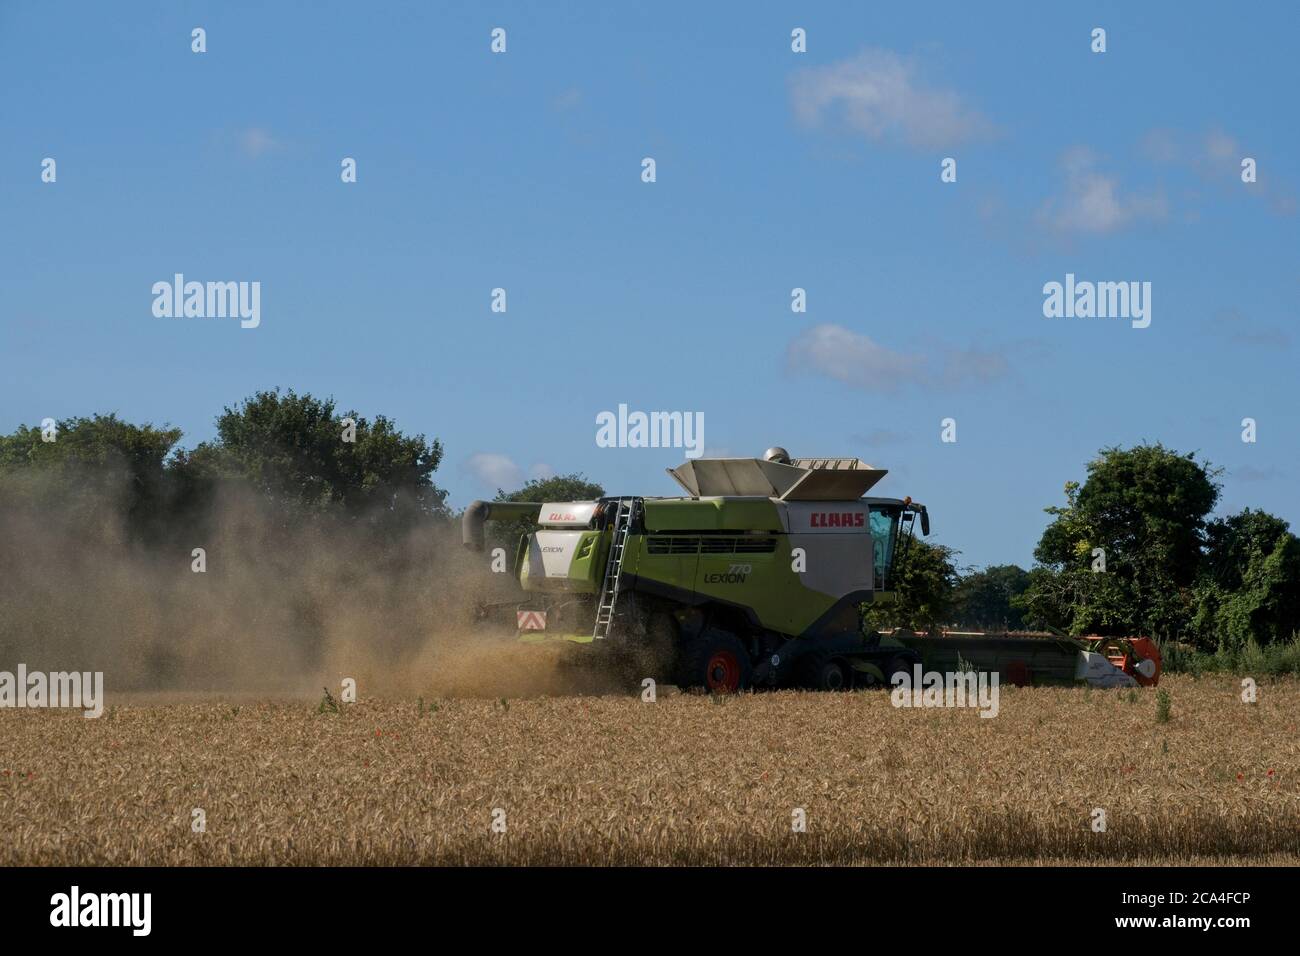 Winter Harvest Rear view of combined harvester at work in field Dusty Sunny cloudy blue sky Stubble in field Trees Landscape format Stock Photo